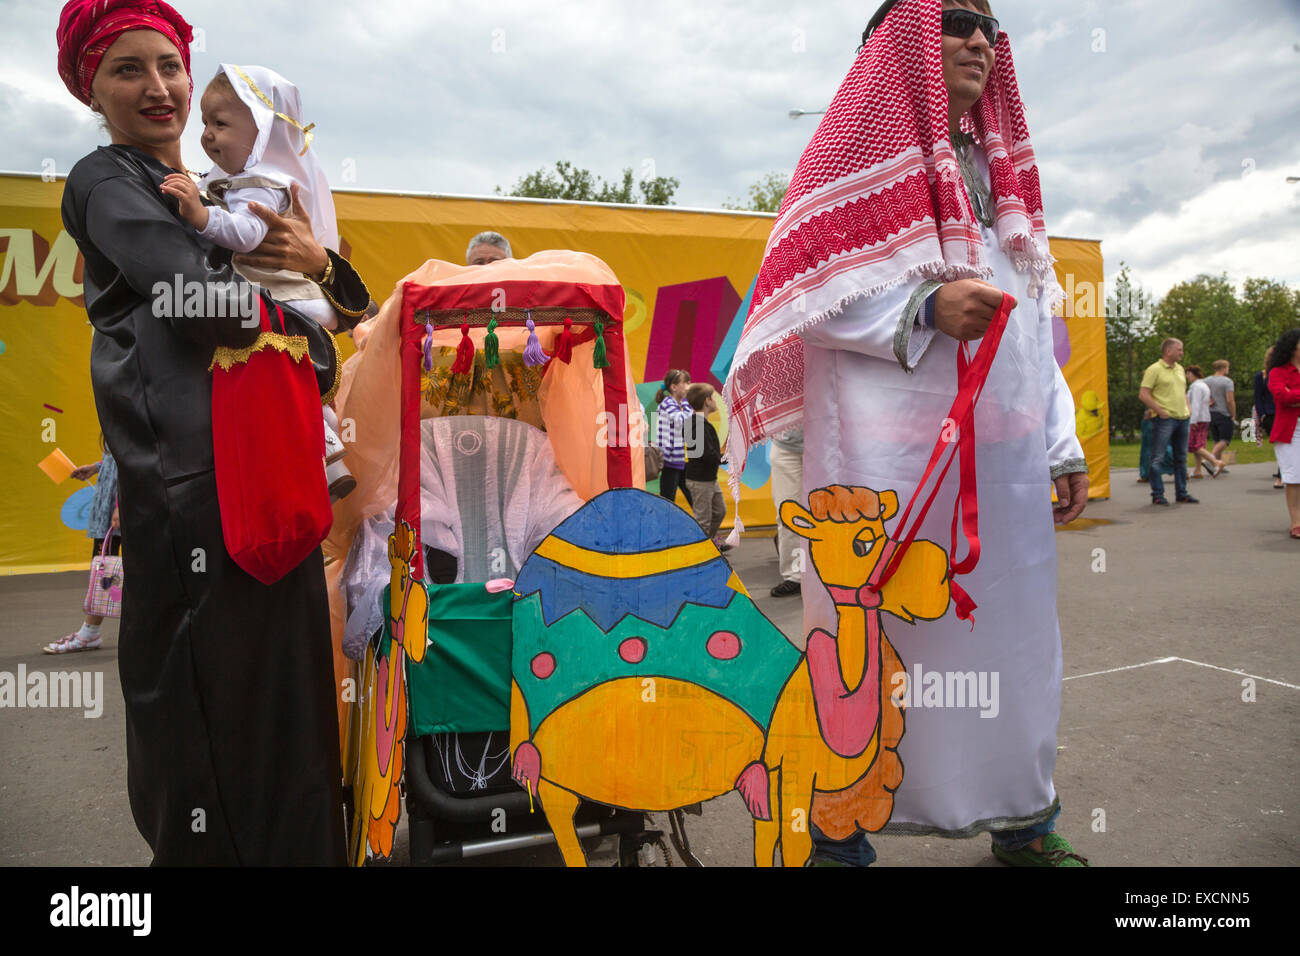 Moscow, Russia. 11th July, 2015. Participants of a Baby Stroller Parade in Gorky Park during the celebration of the Day of Family, Love and Fidelity in Moscow, Russia Credit:  Nikolay Vinokurov/Alamy Live News Stock Photo